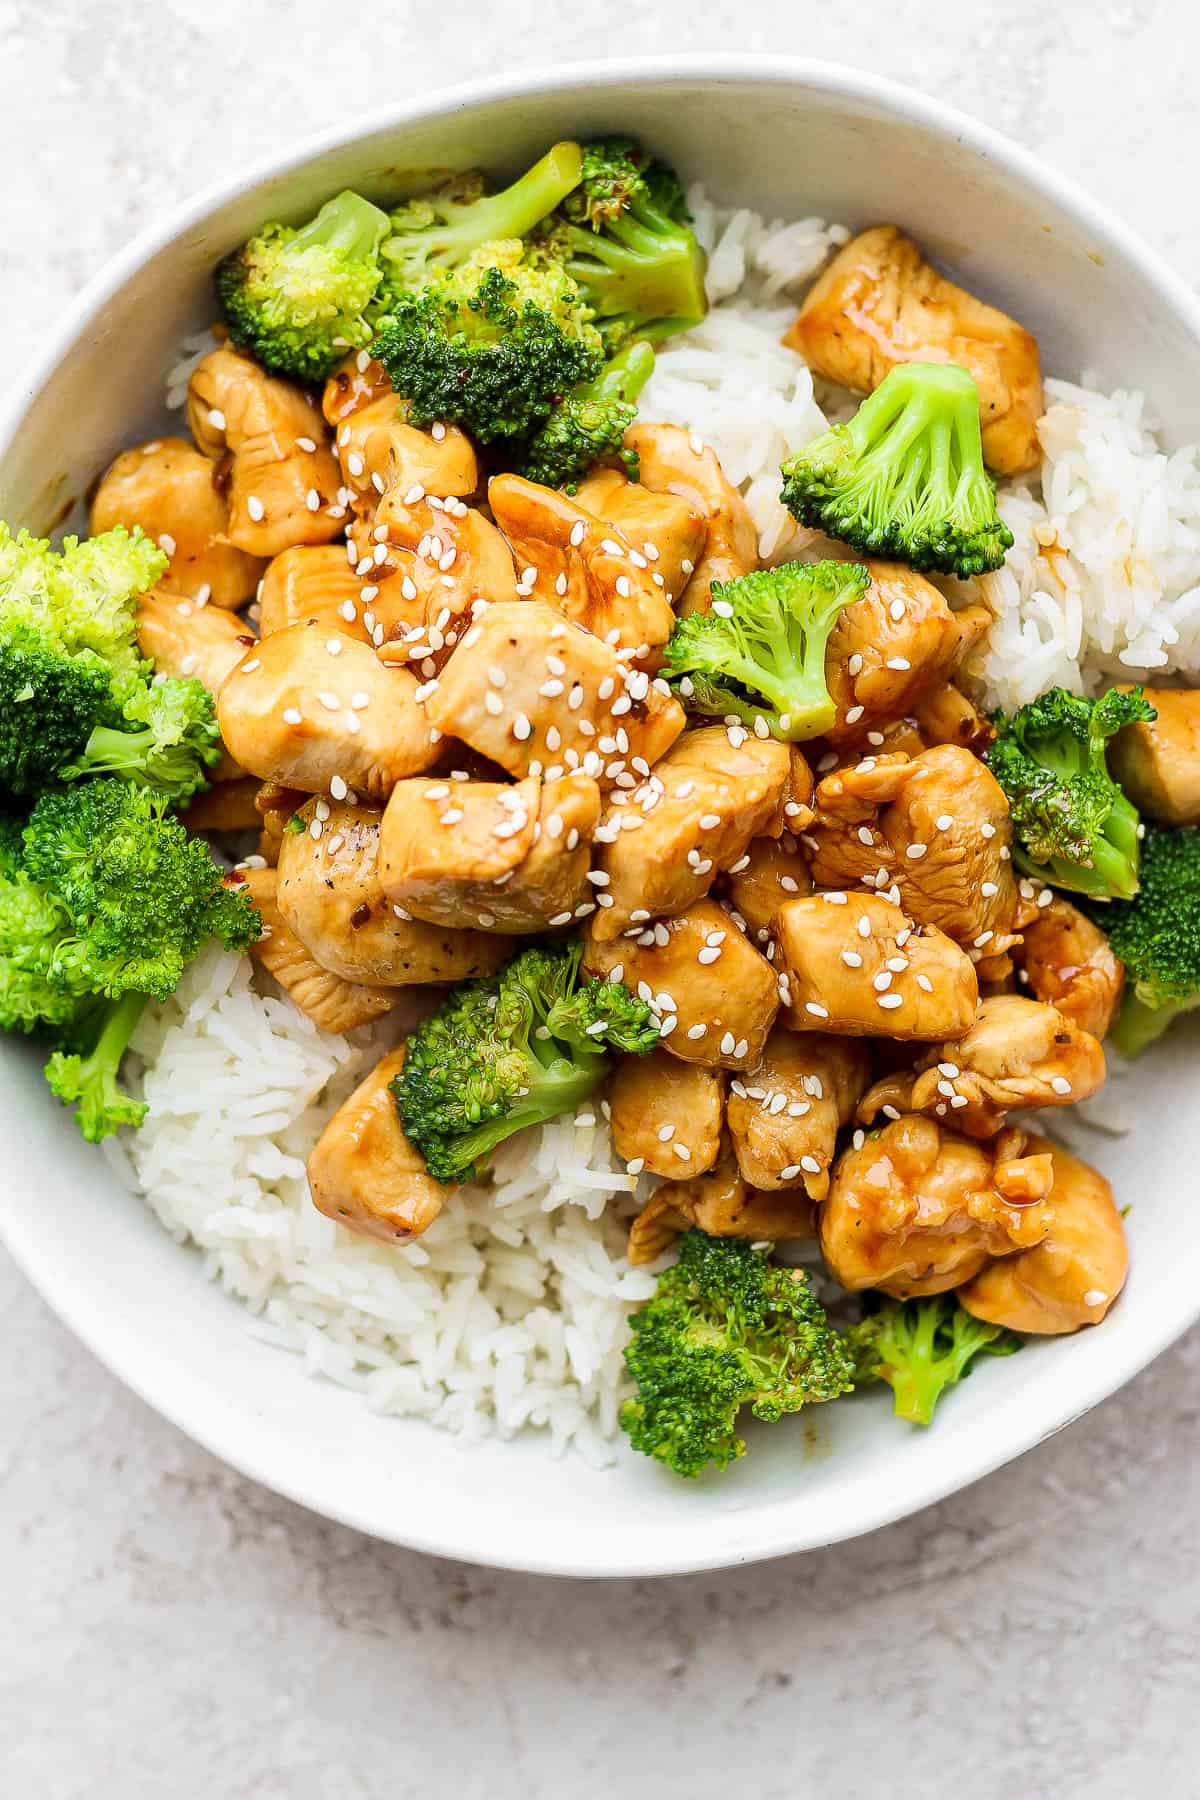 Chicken teriyaki with broccoli on top of white rice.